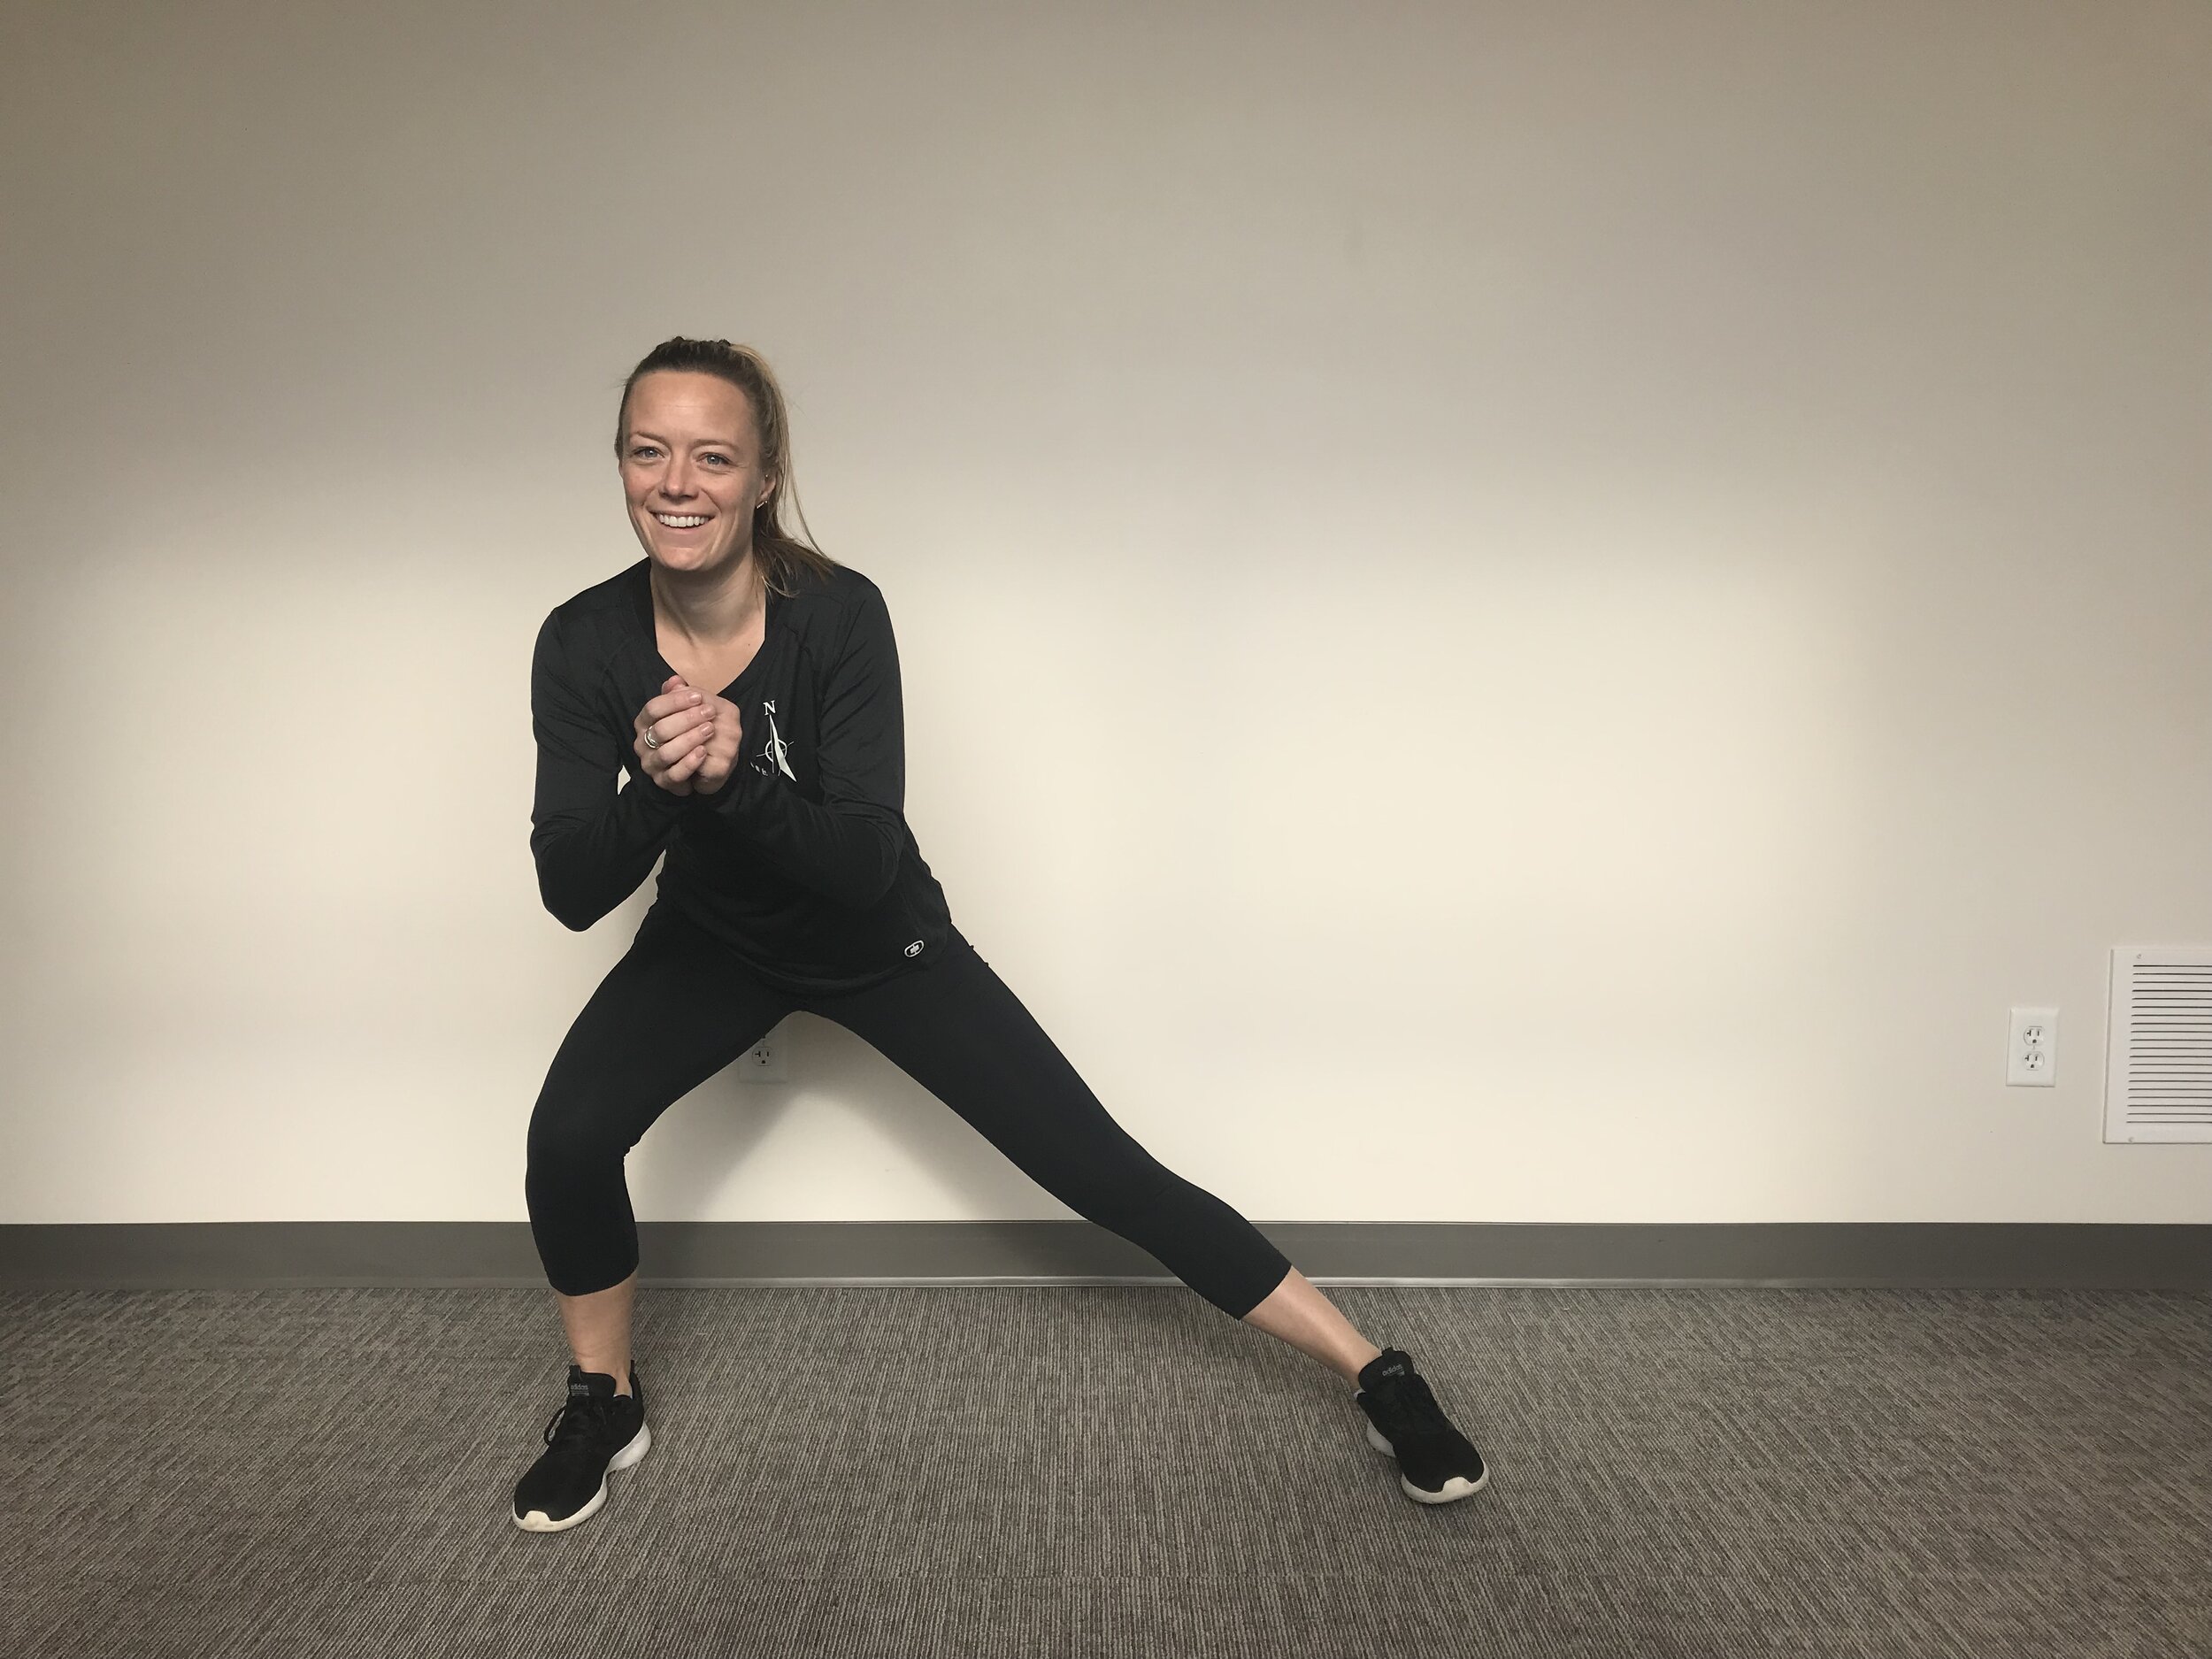 Step out to the side; drop your hips back into a lunge keeping your knee right over your toe and your outside leg straight. Repeat 15-20 times each leg